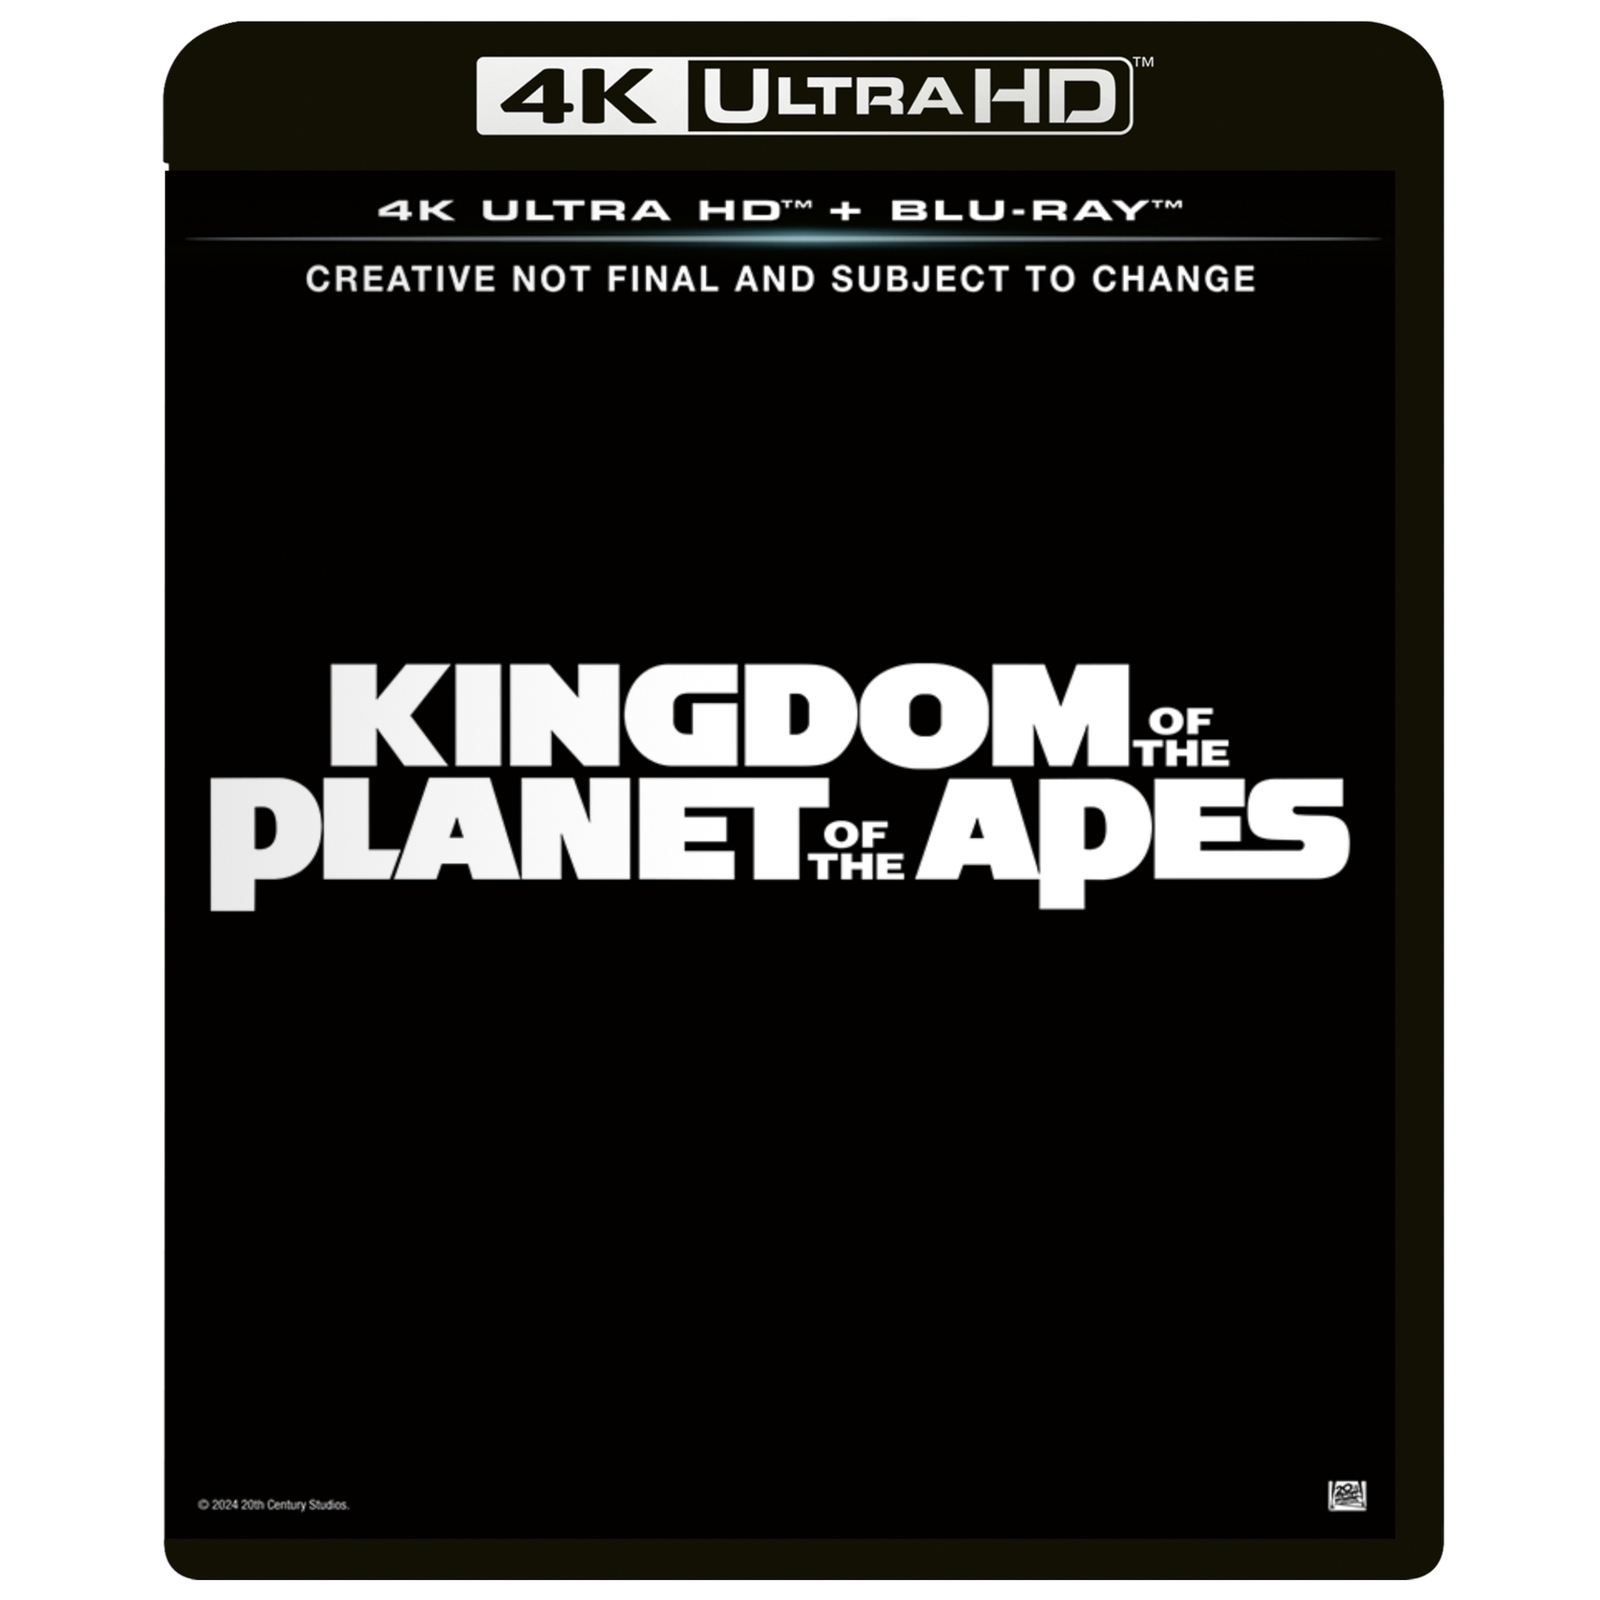 The Kingdom of The Planet Of The Apes 4K Ultra HD & Blu-ray von Planet Of The Apes